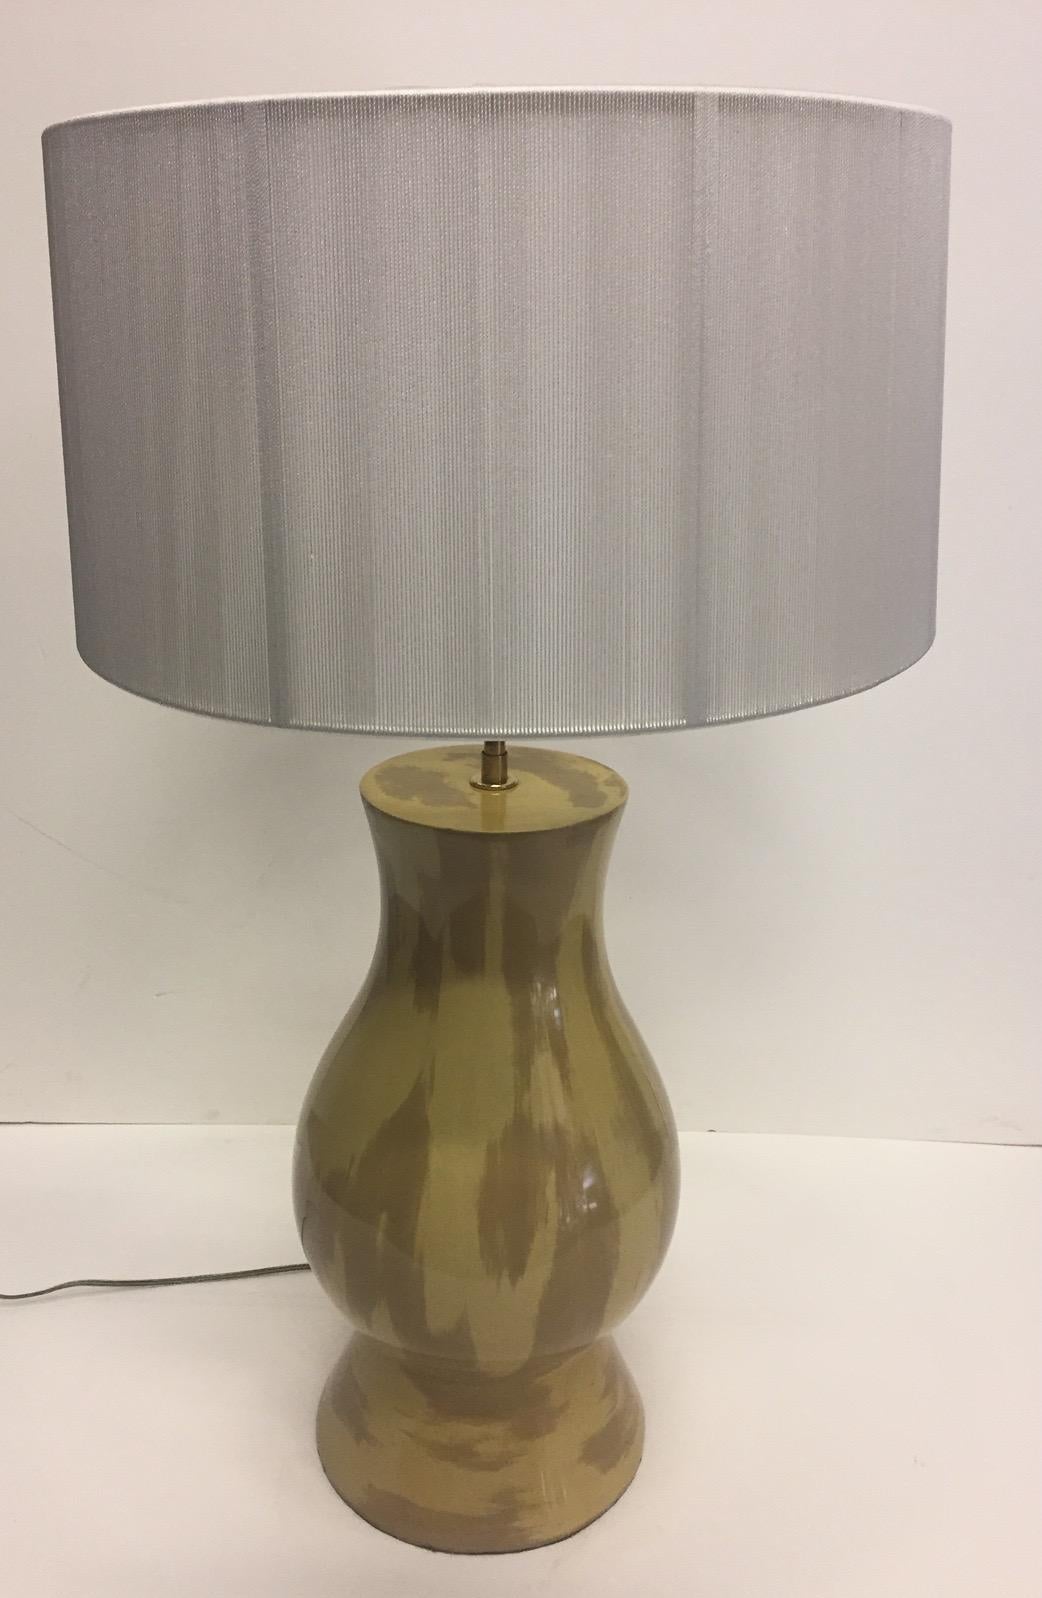 Rare Collectible Pair of Karl Springer Mustard and Khaki Ceramic Lamps In Good Condition For Sale In Hopewell, NJ